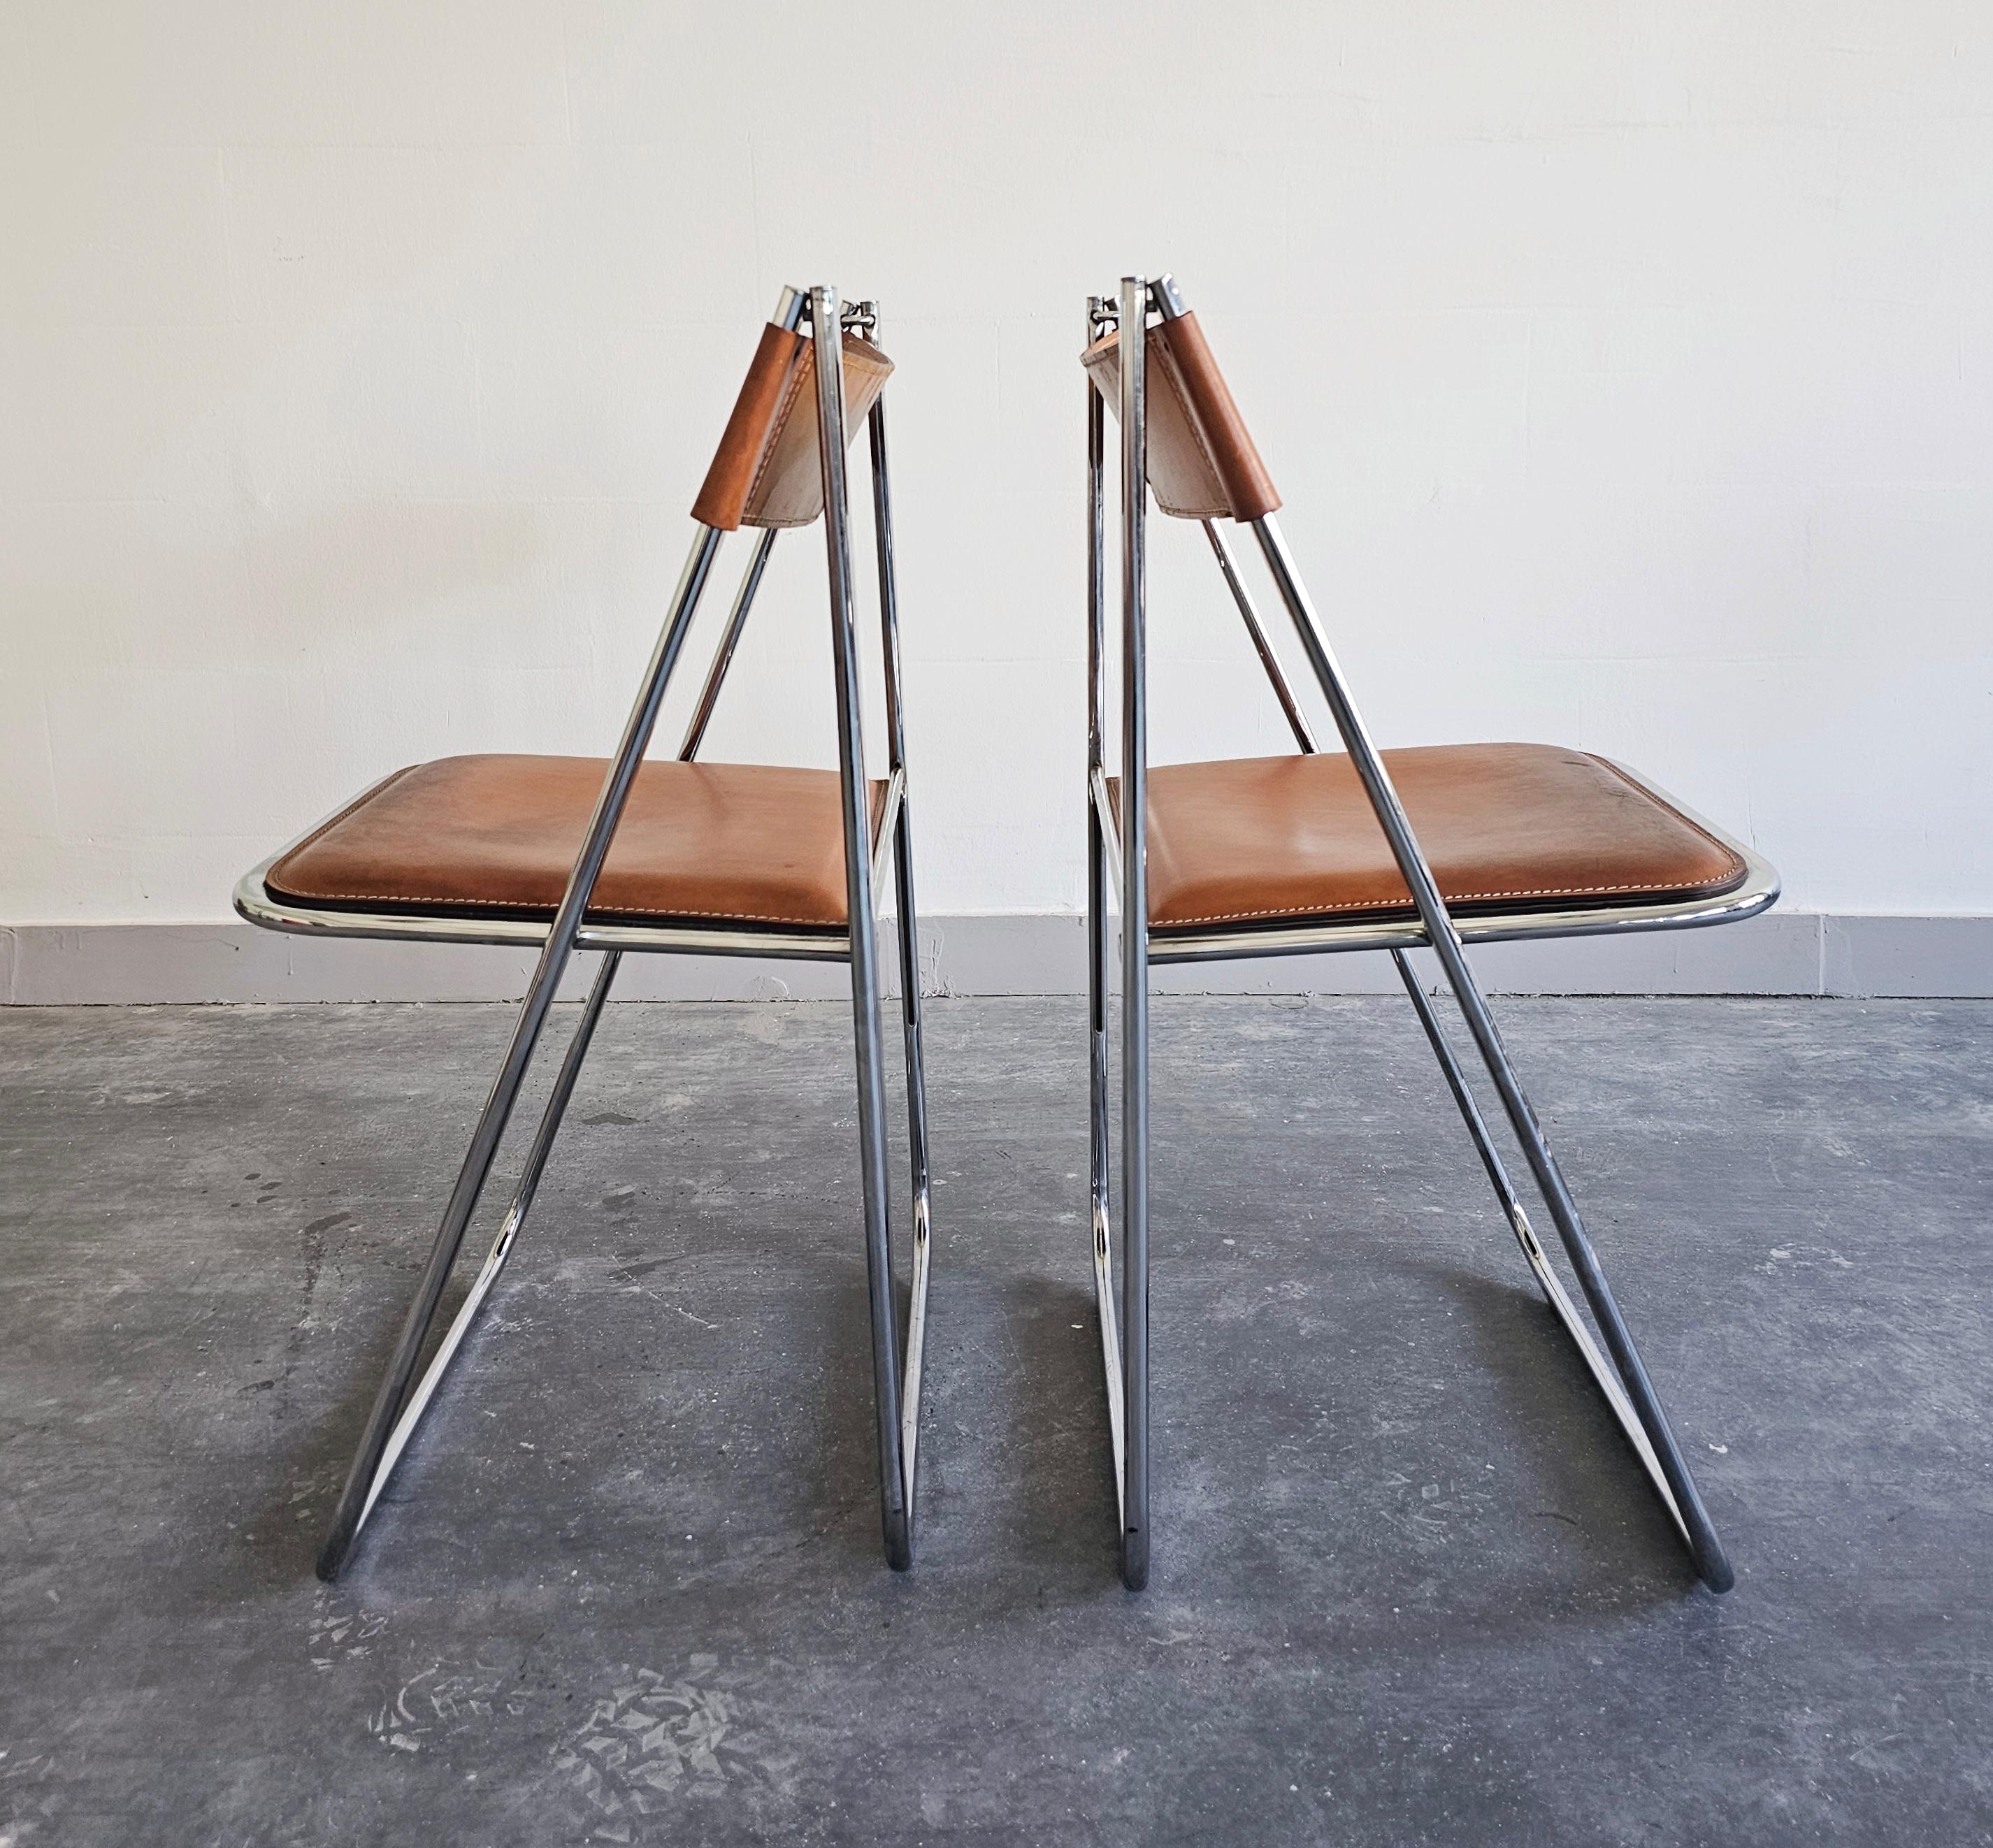 Post-Modern Pair of Folding Chairs by Arrben, model Tamara, in cognac leather, Italy 1970s For Sale